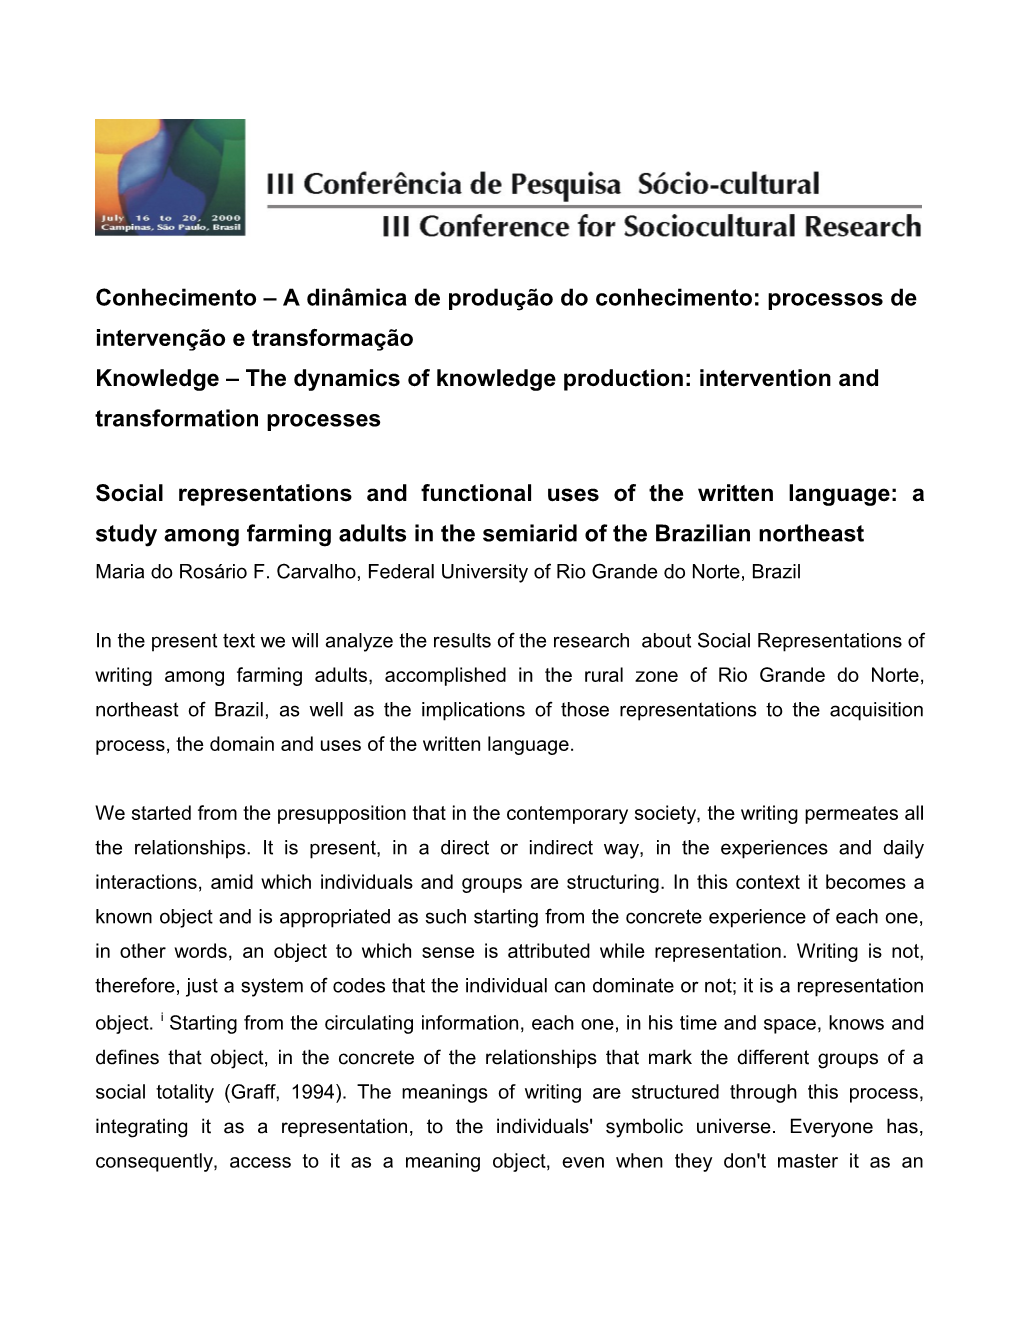 Social Representations and Functional Uses of the Written Language: a Study Among Farming